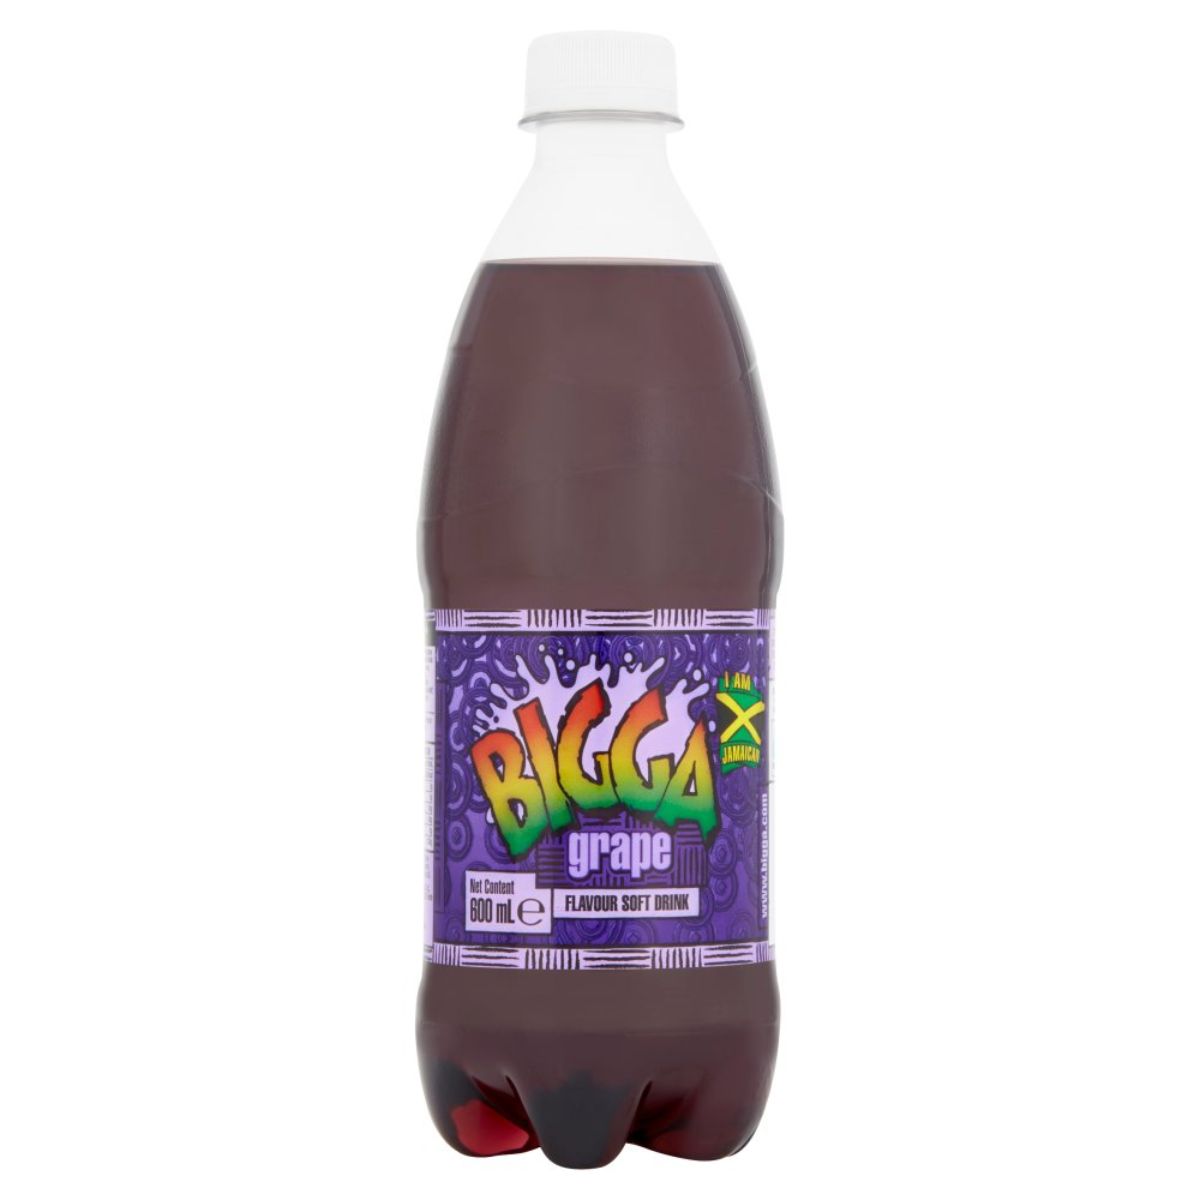 A bottle of Bigga - Grape Flavour Soft Drink - 600ml on a white background.